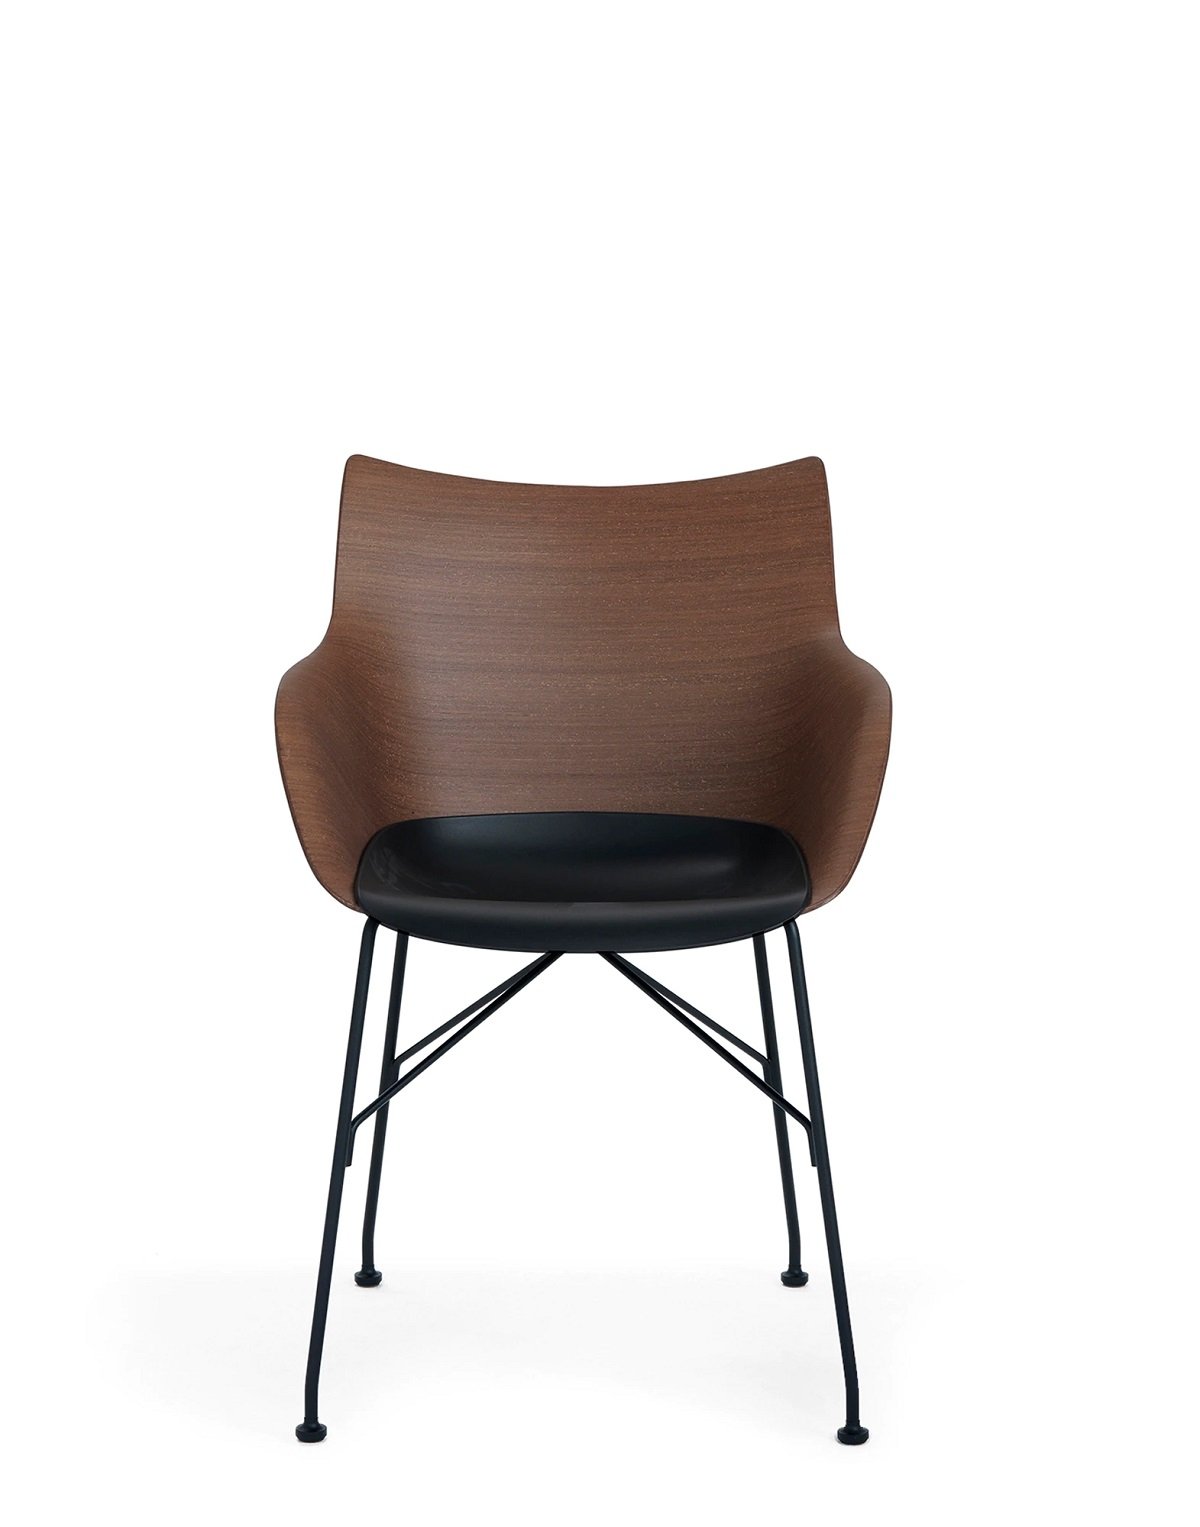 Q/Wood Armchair from Kartell, designed by Philippe Starck